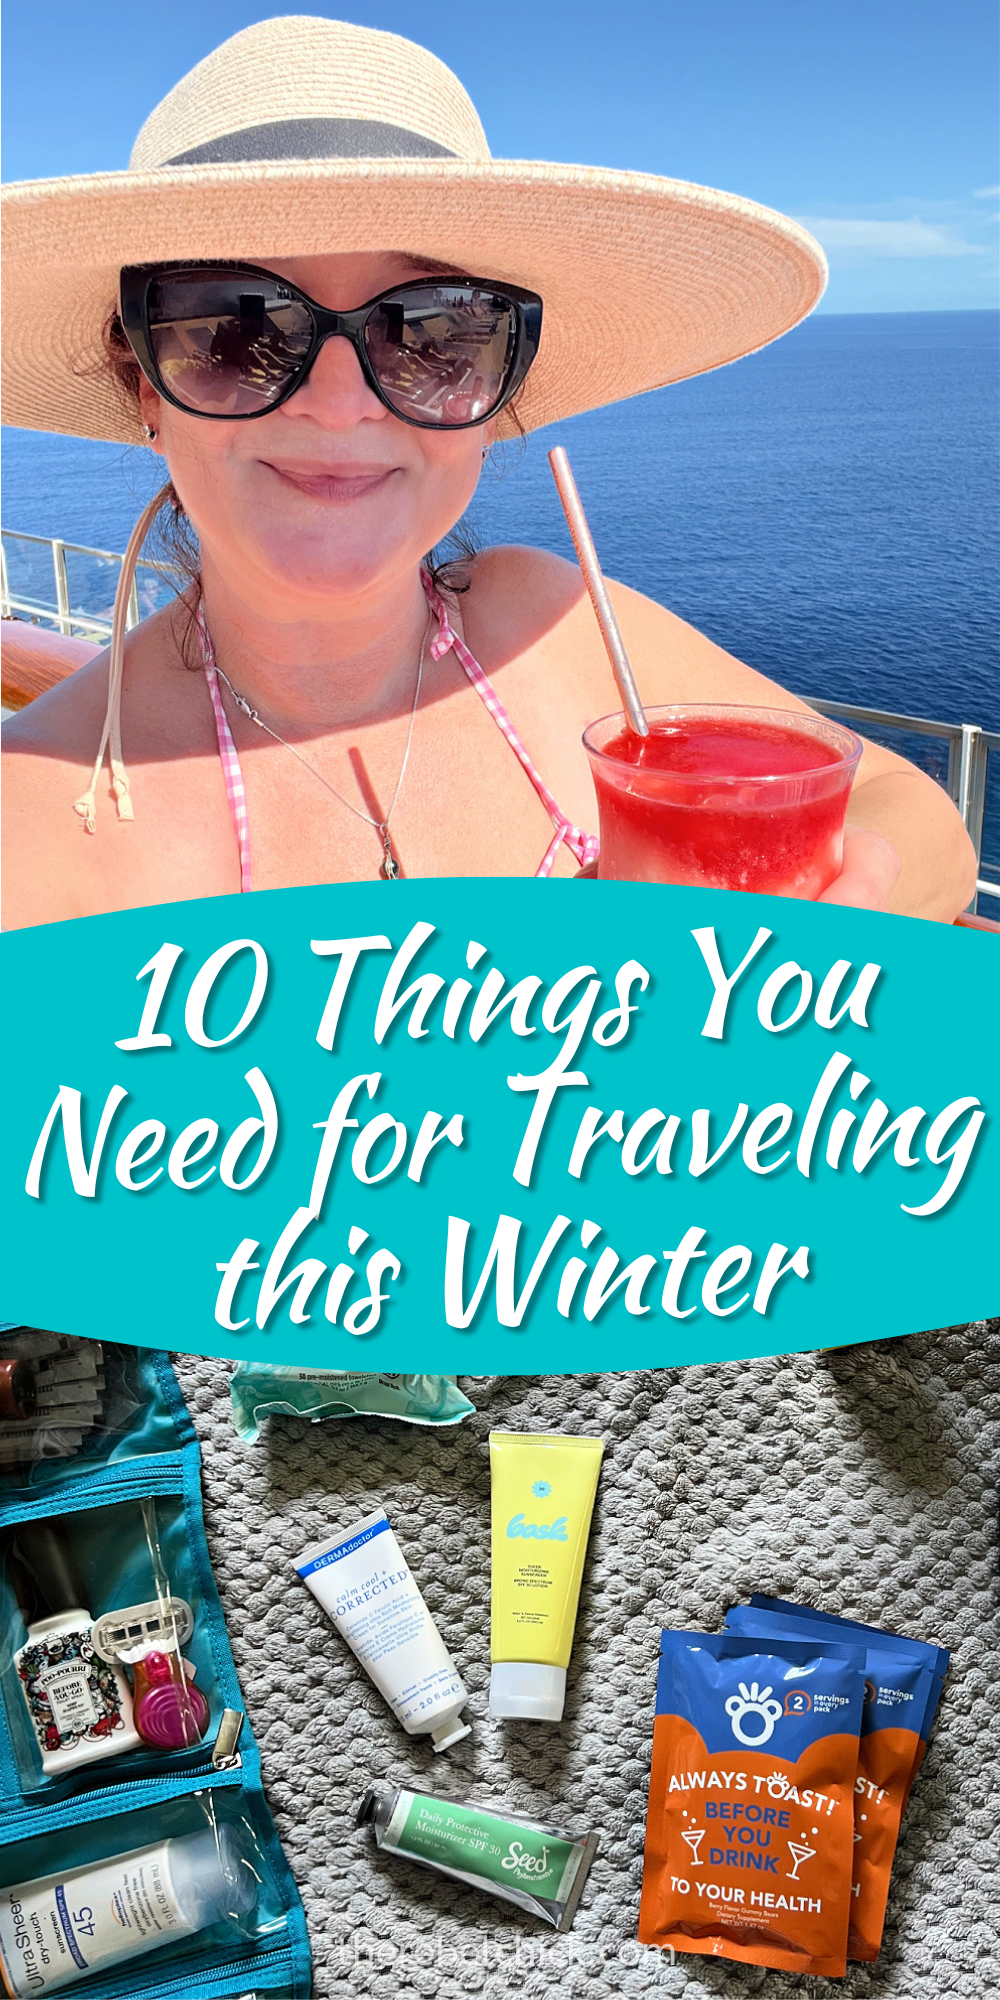 10 Things You Need for Traveling this Winter